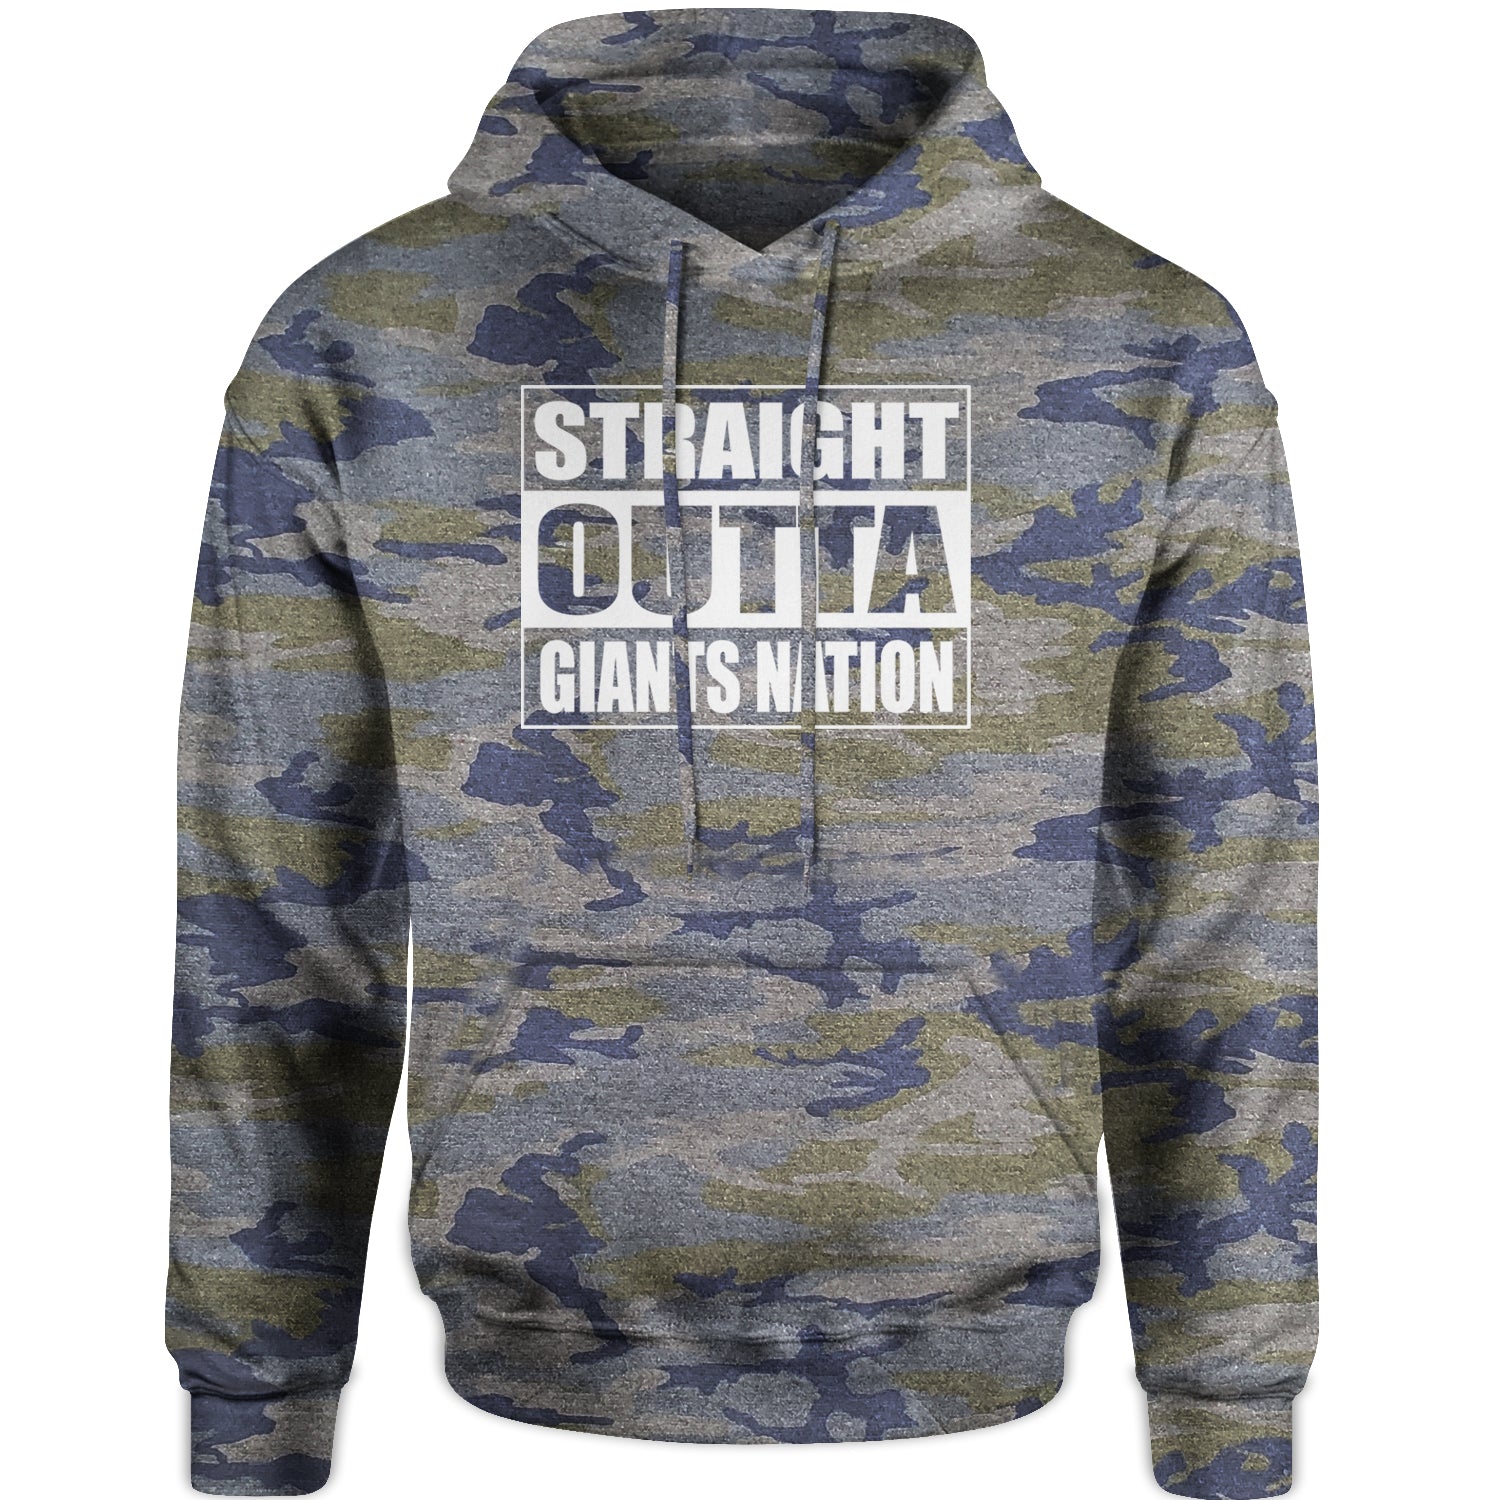 Straight Outta Giants Nation Adult Hoodie Sweatshirt bleed, blue, football, giants, new, ny, york by Expression Tees